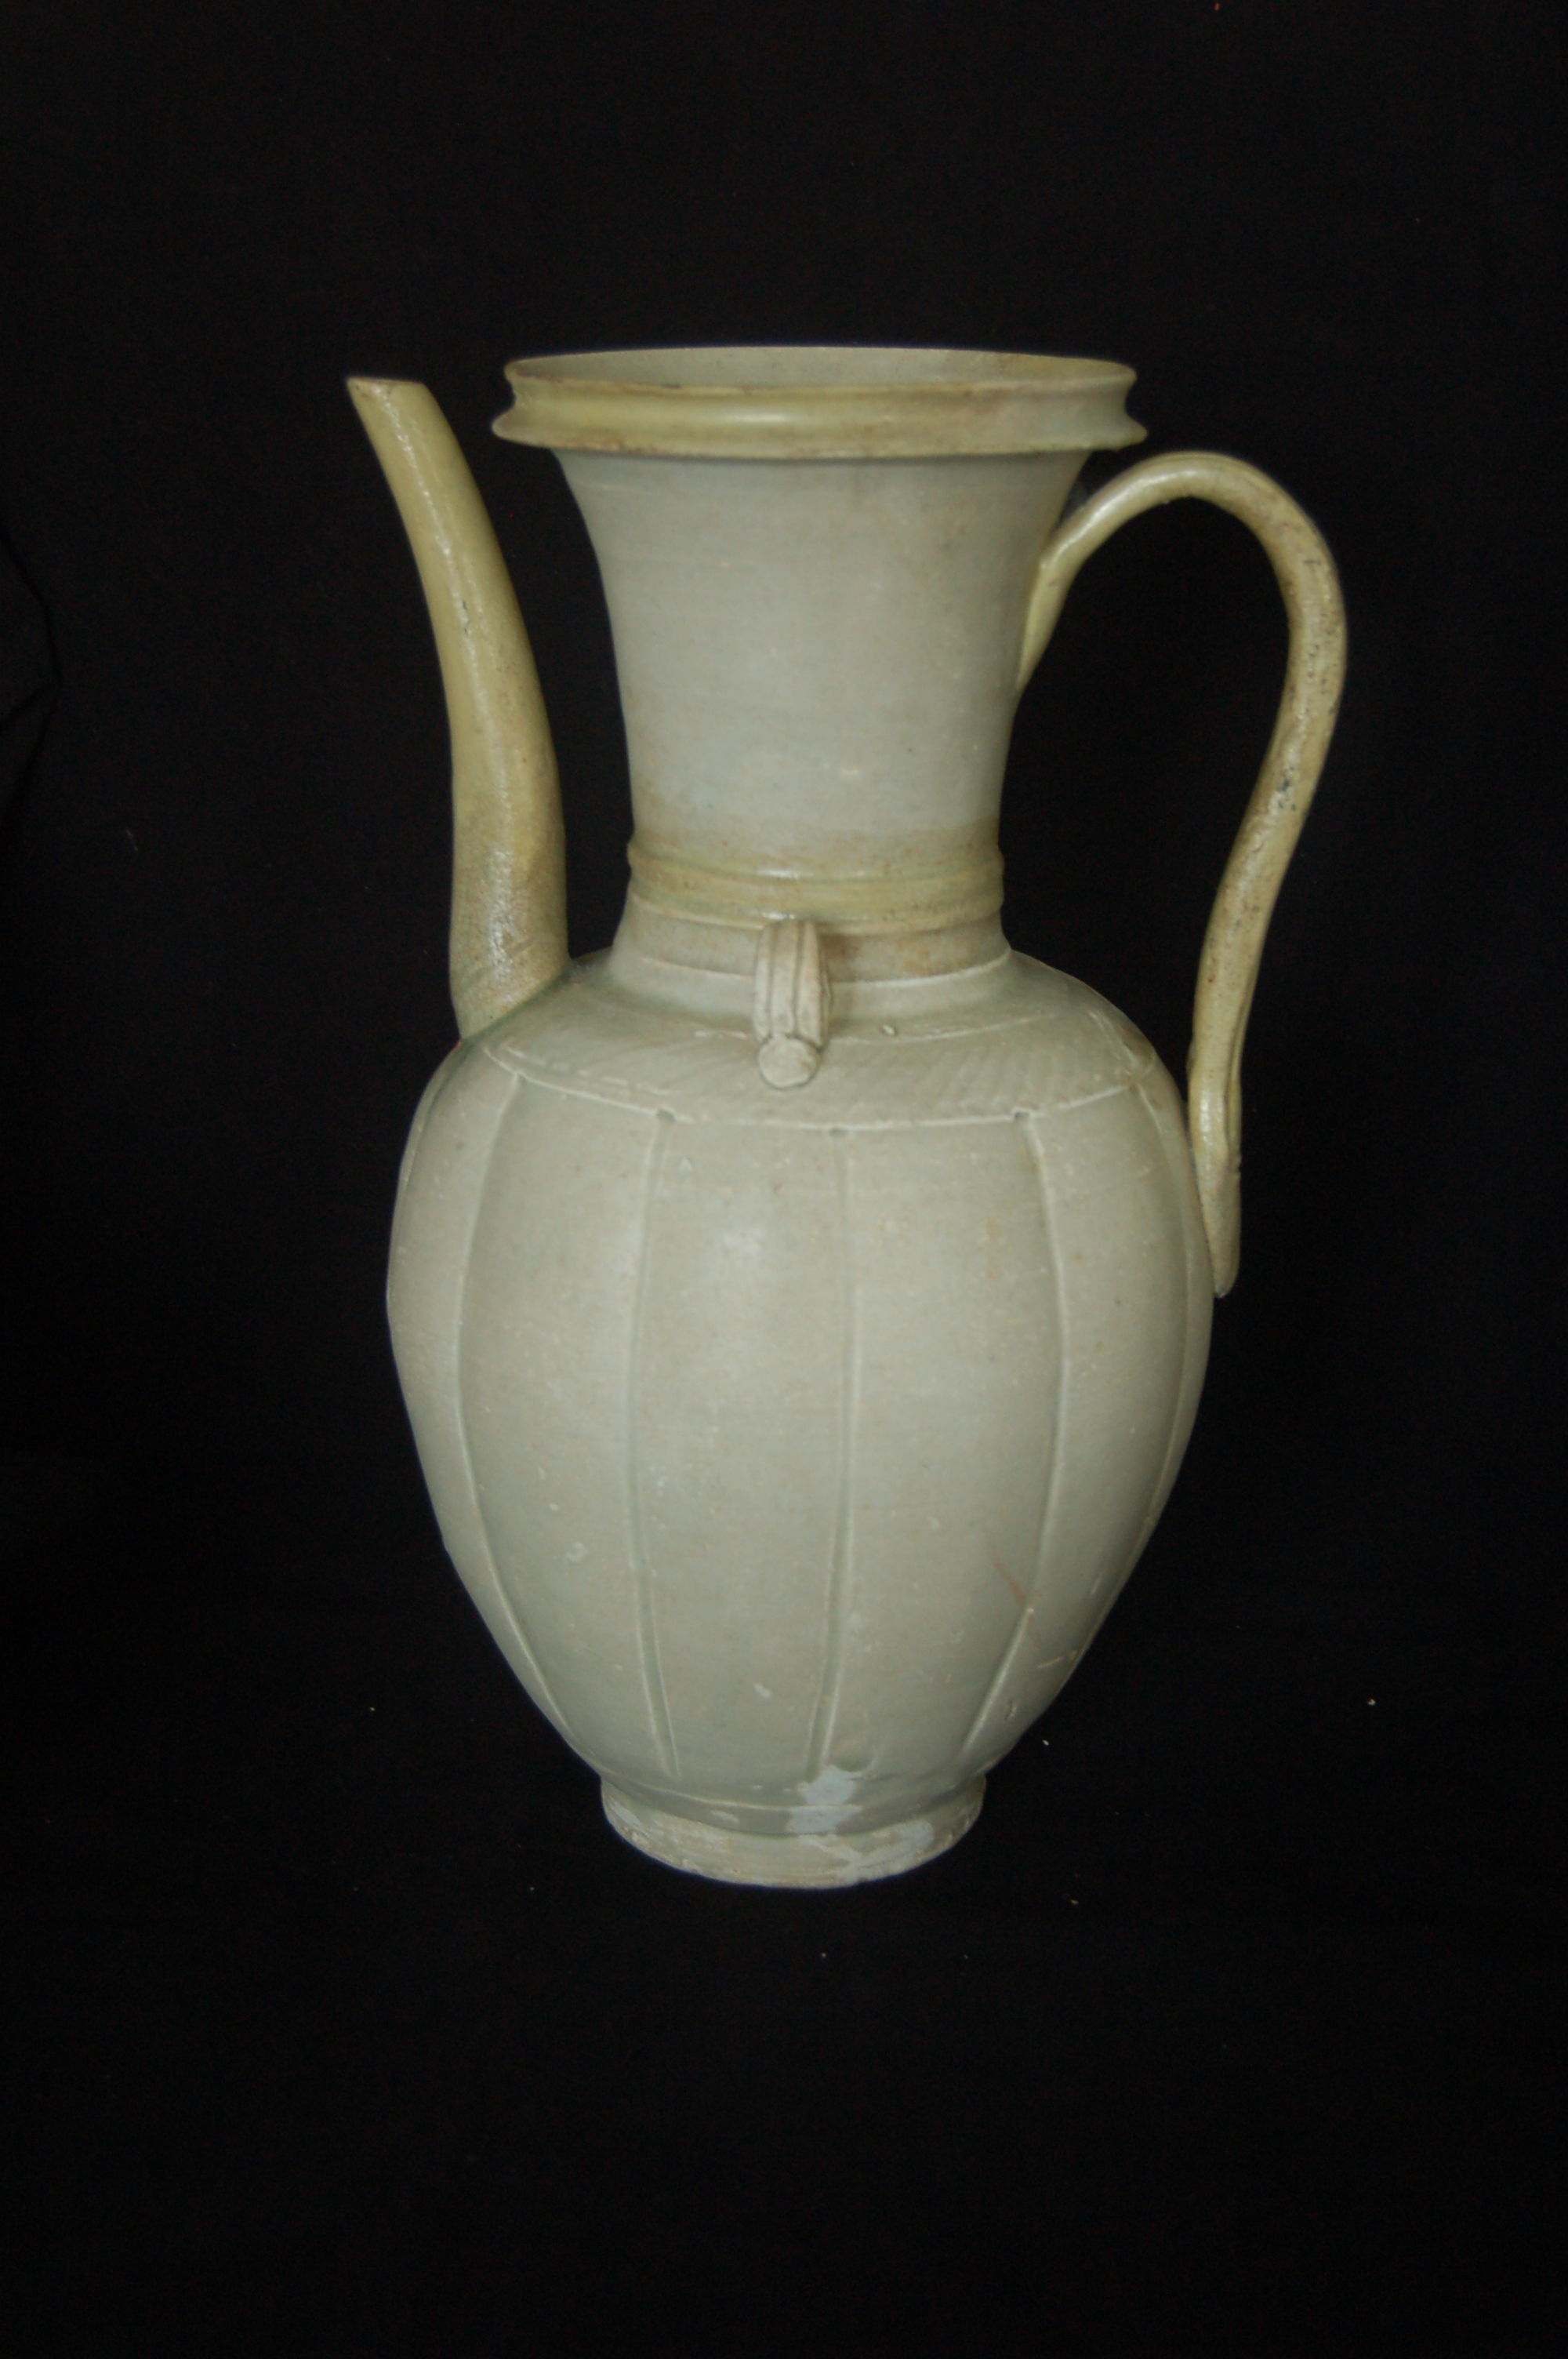 Large ewer with a long neck, flared mouth, flanged mouth-rim, a strap handle, and curved spout. The carved foot-ring is straight. The body is slightly lobed with each lobe divided by vertically incised lines. The lower neck is decorated with flanges and the shoulder has spiral striations. Diameter 18 cm, height 33 cm. Note: the neck, spout and handle have been repaired.